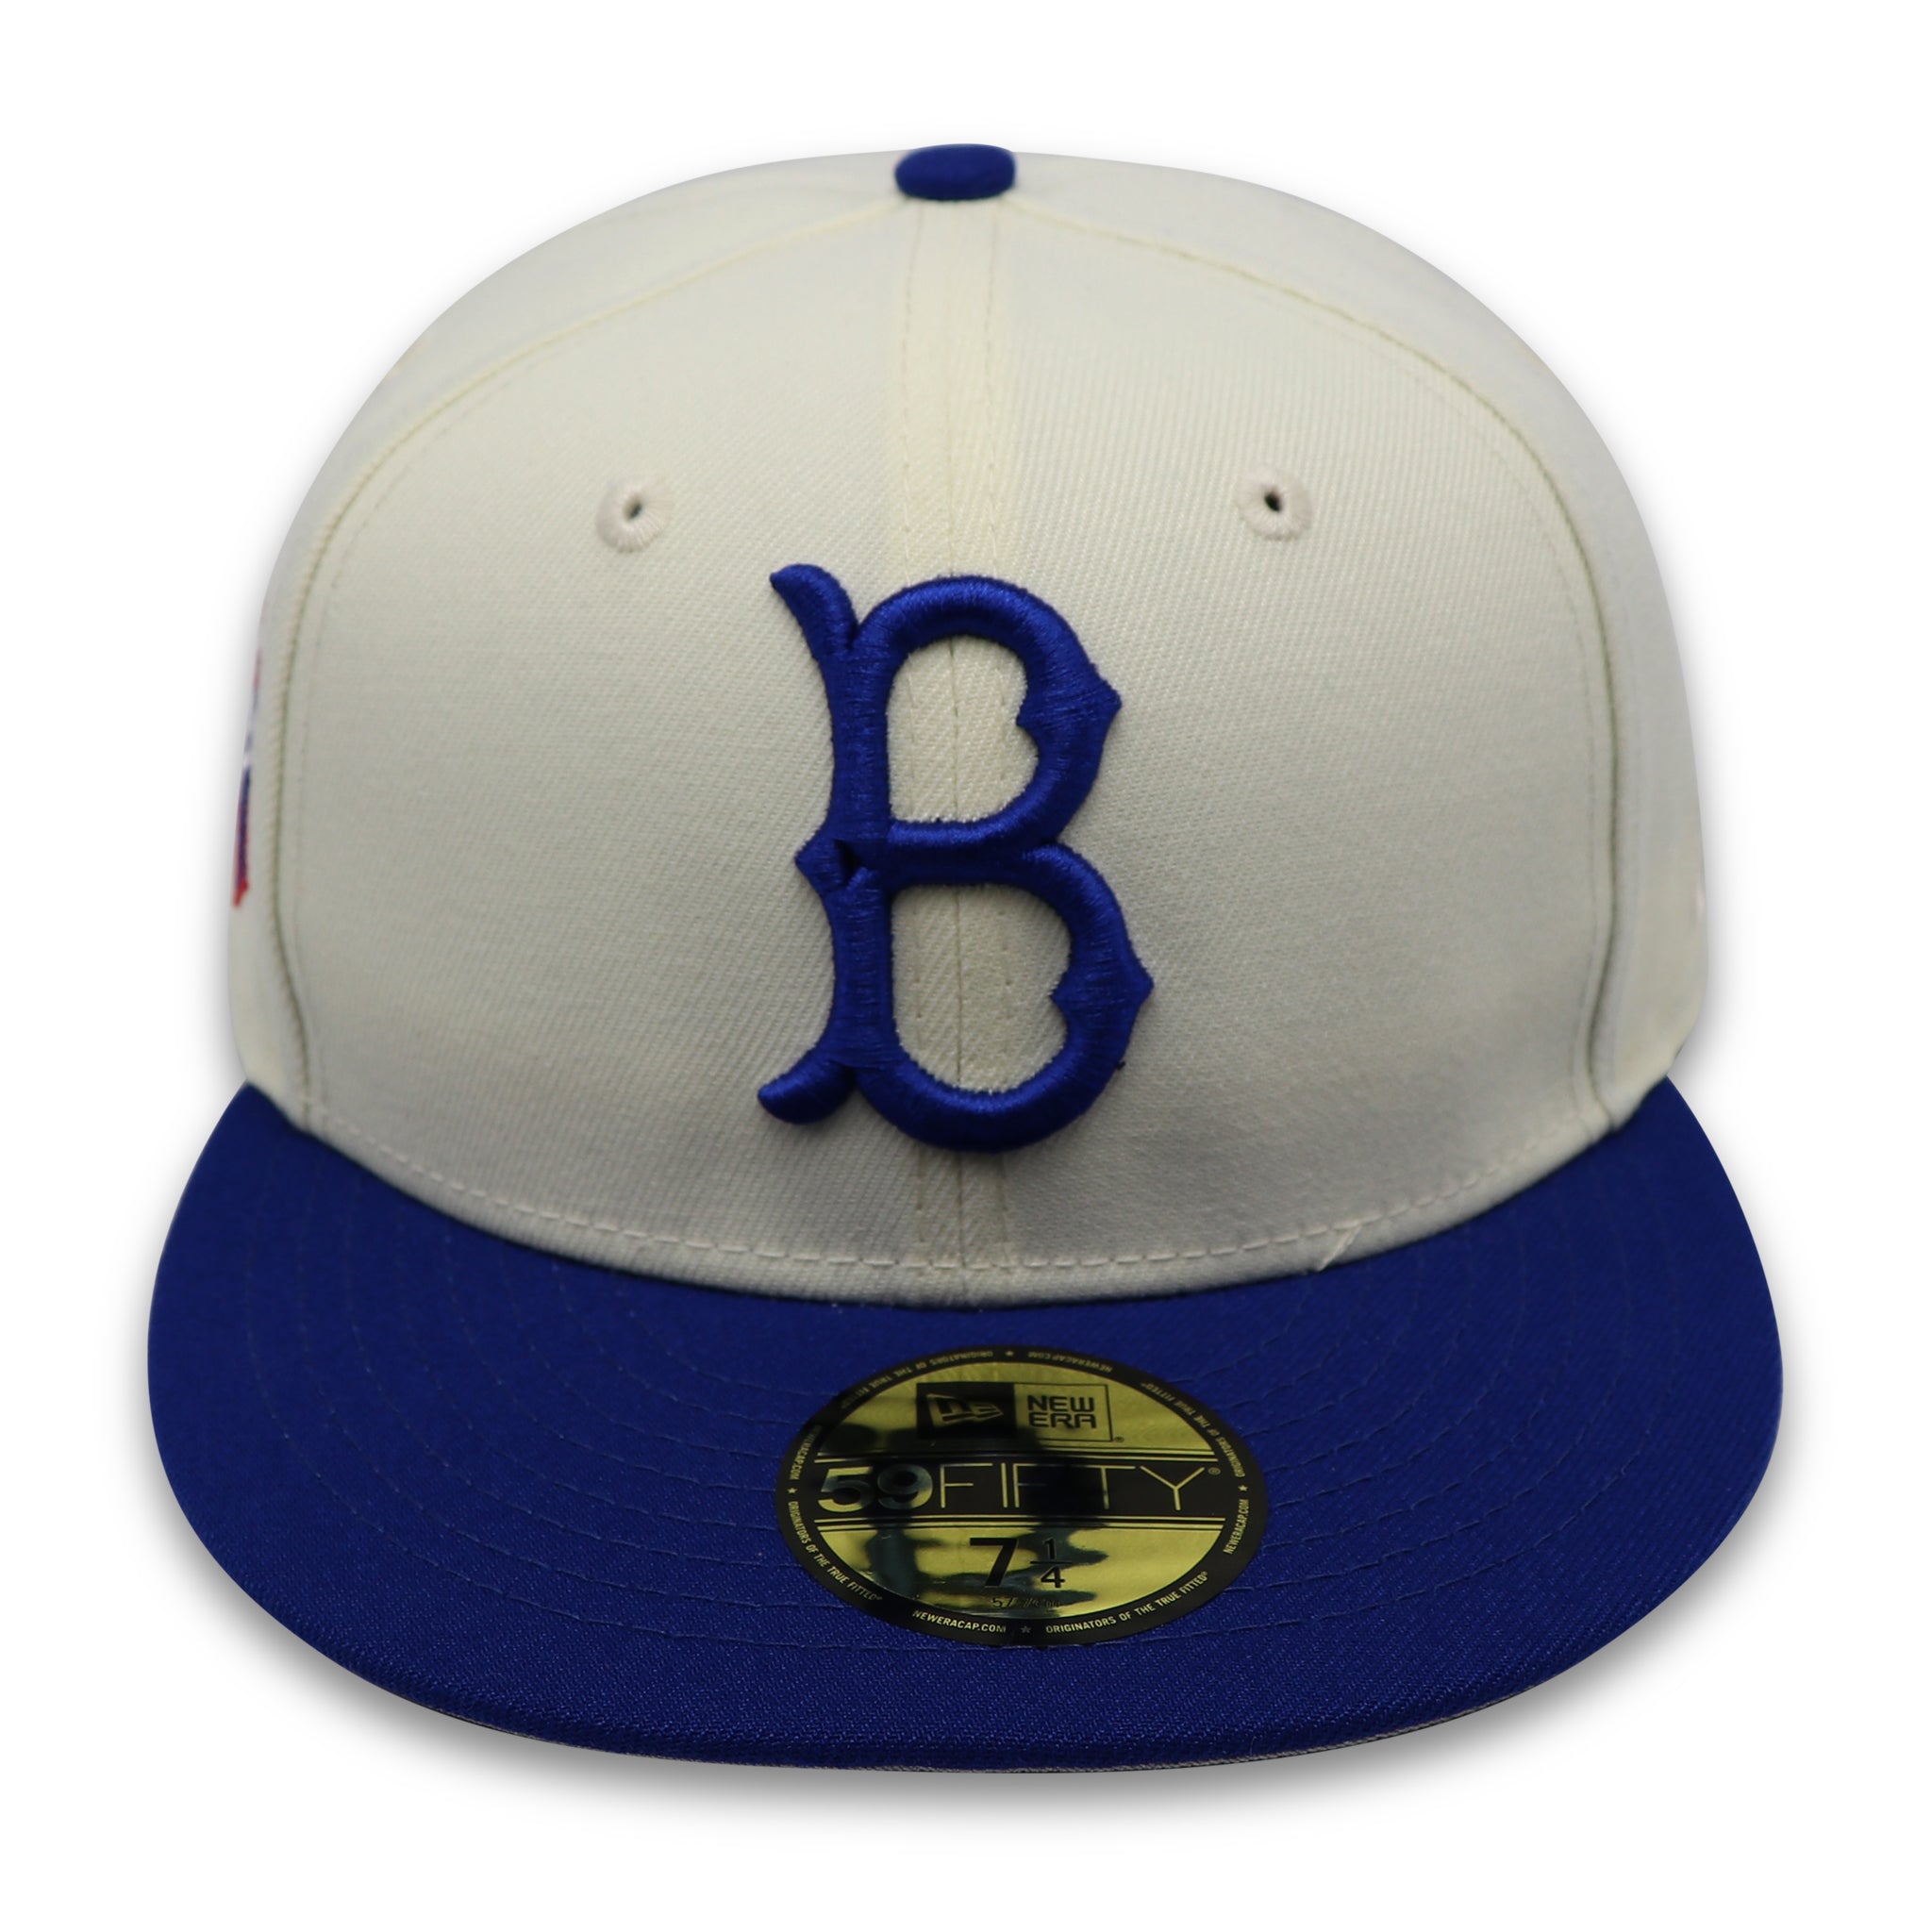 BROOKLYN DODGERS (1955 WORLD SERIES CHAMPIONS) NEW ERA 59FIFTY FITTED